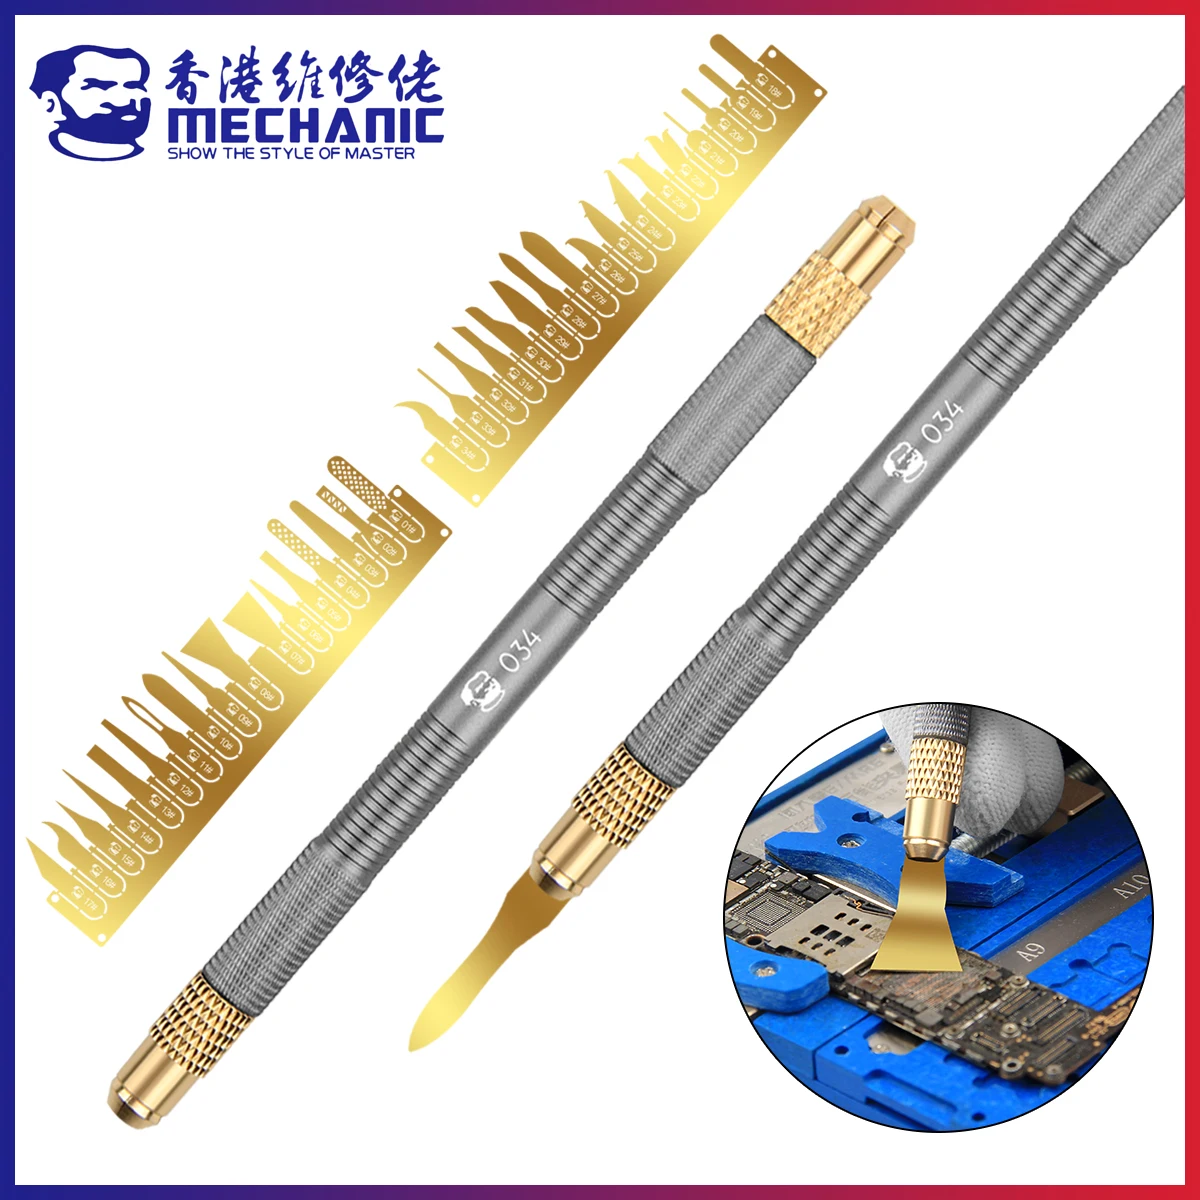 

MECHANIC 034 Non-Slip Metal Scalpel Knife Kit Cutter Engraving Craft Carving Knives 34 Blades Phone PCB Stencil Repair Hand Tool